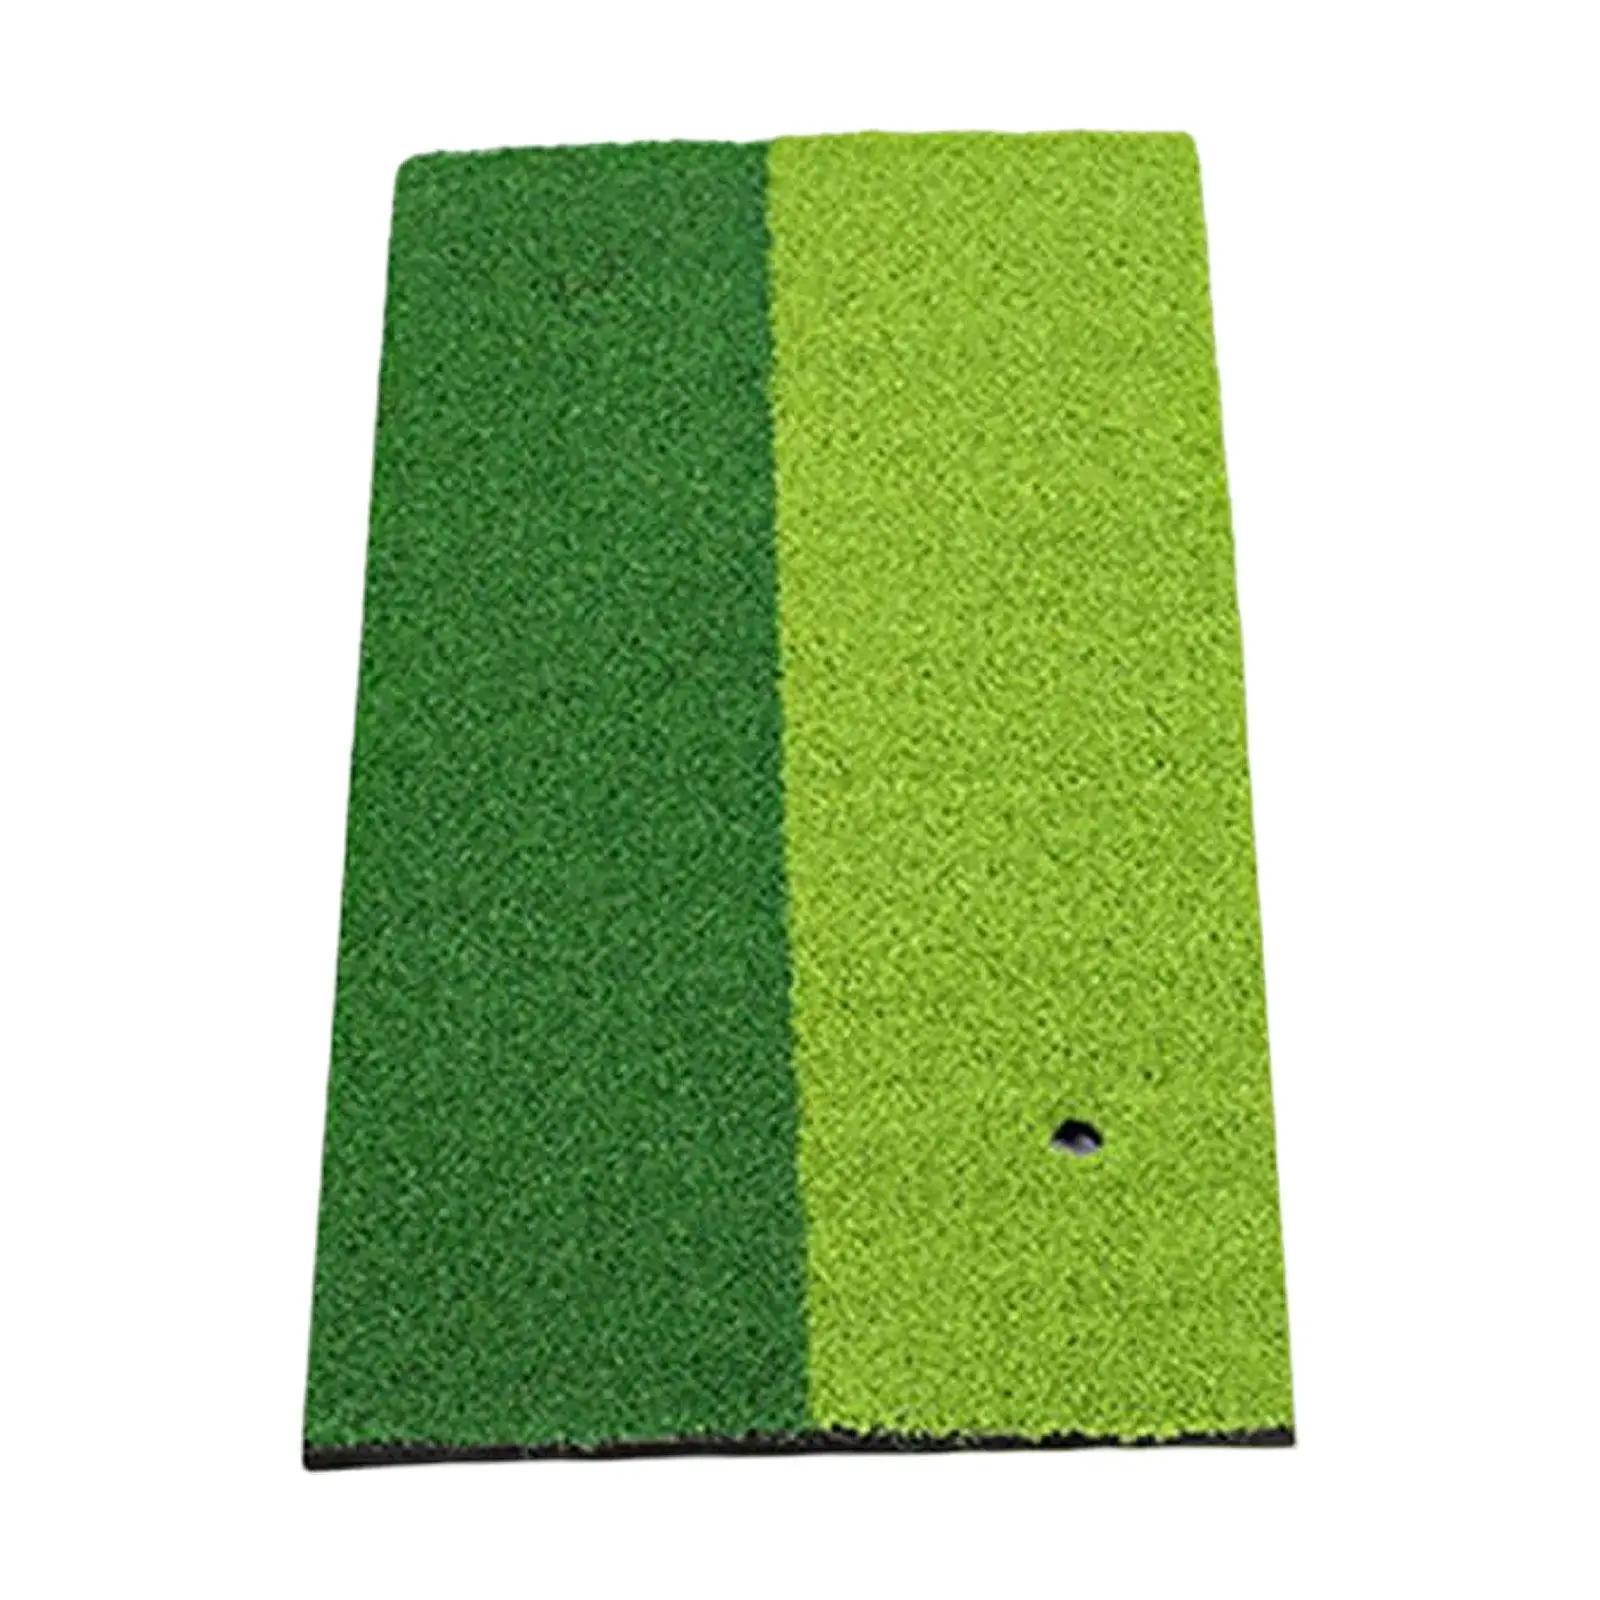 Golf Hitting Mat Golf Training Durable for Indoor Outdoor Gifts Adults